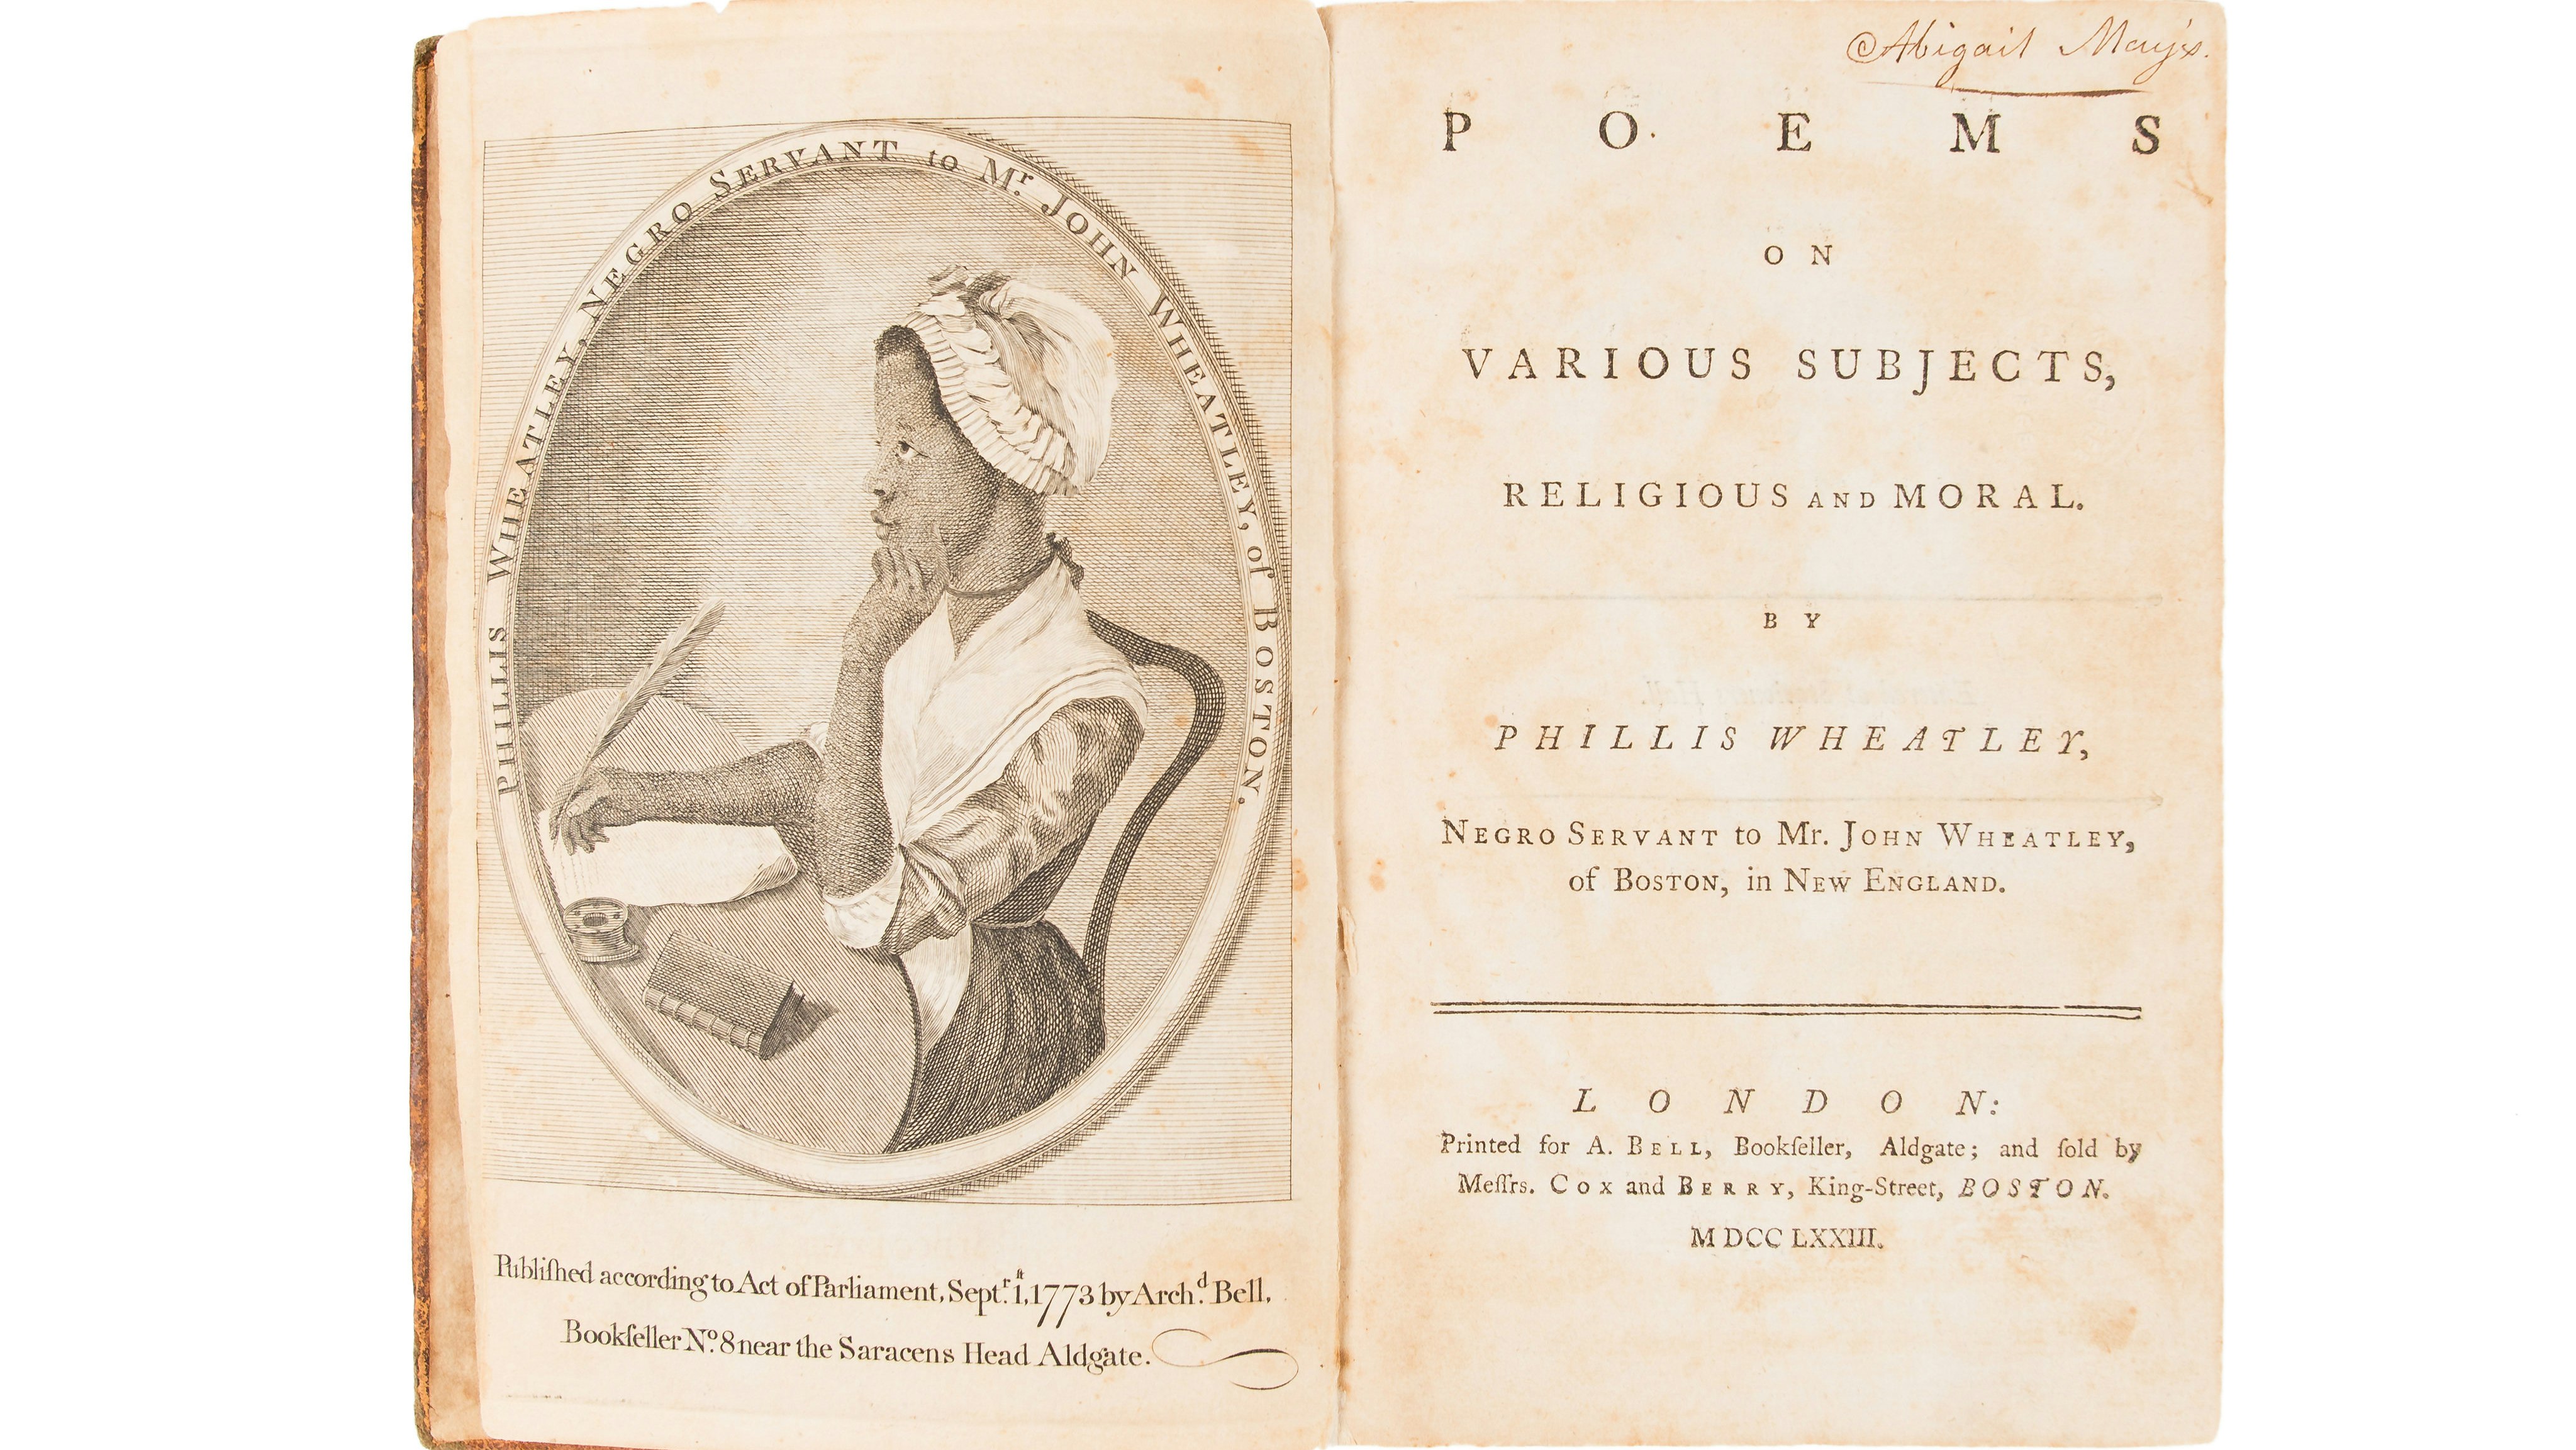 The cover pages of Phillis Wheatley's 1773 book, Poems on Various Subjects, Religious and Moral